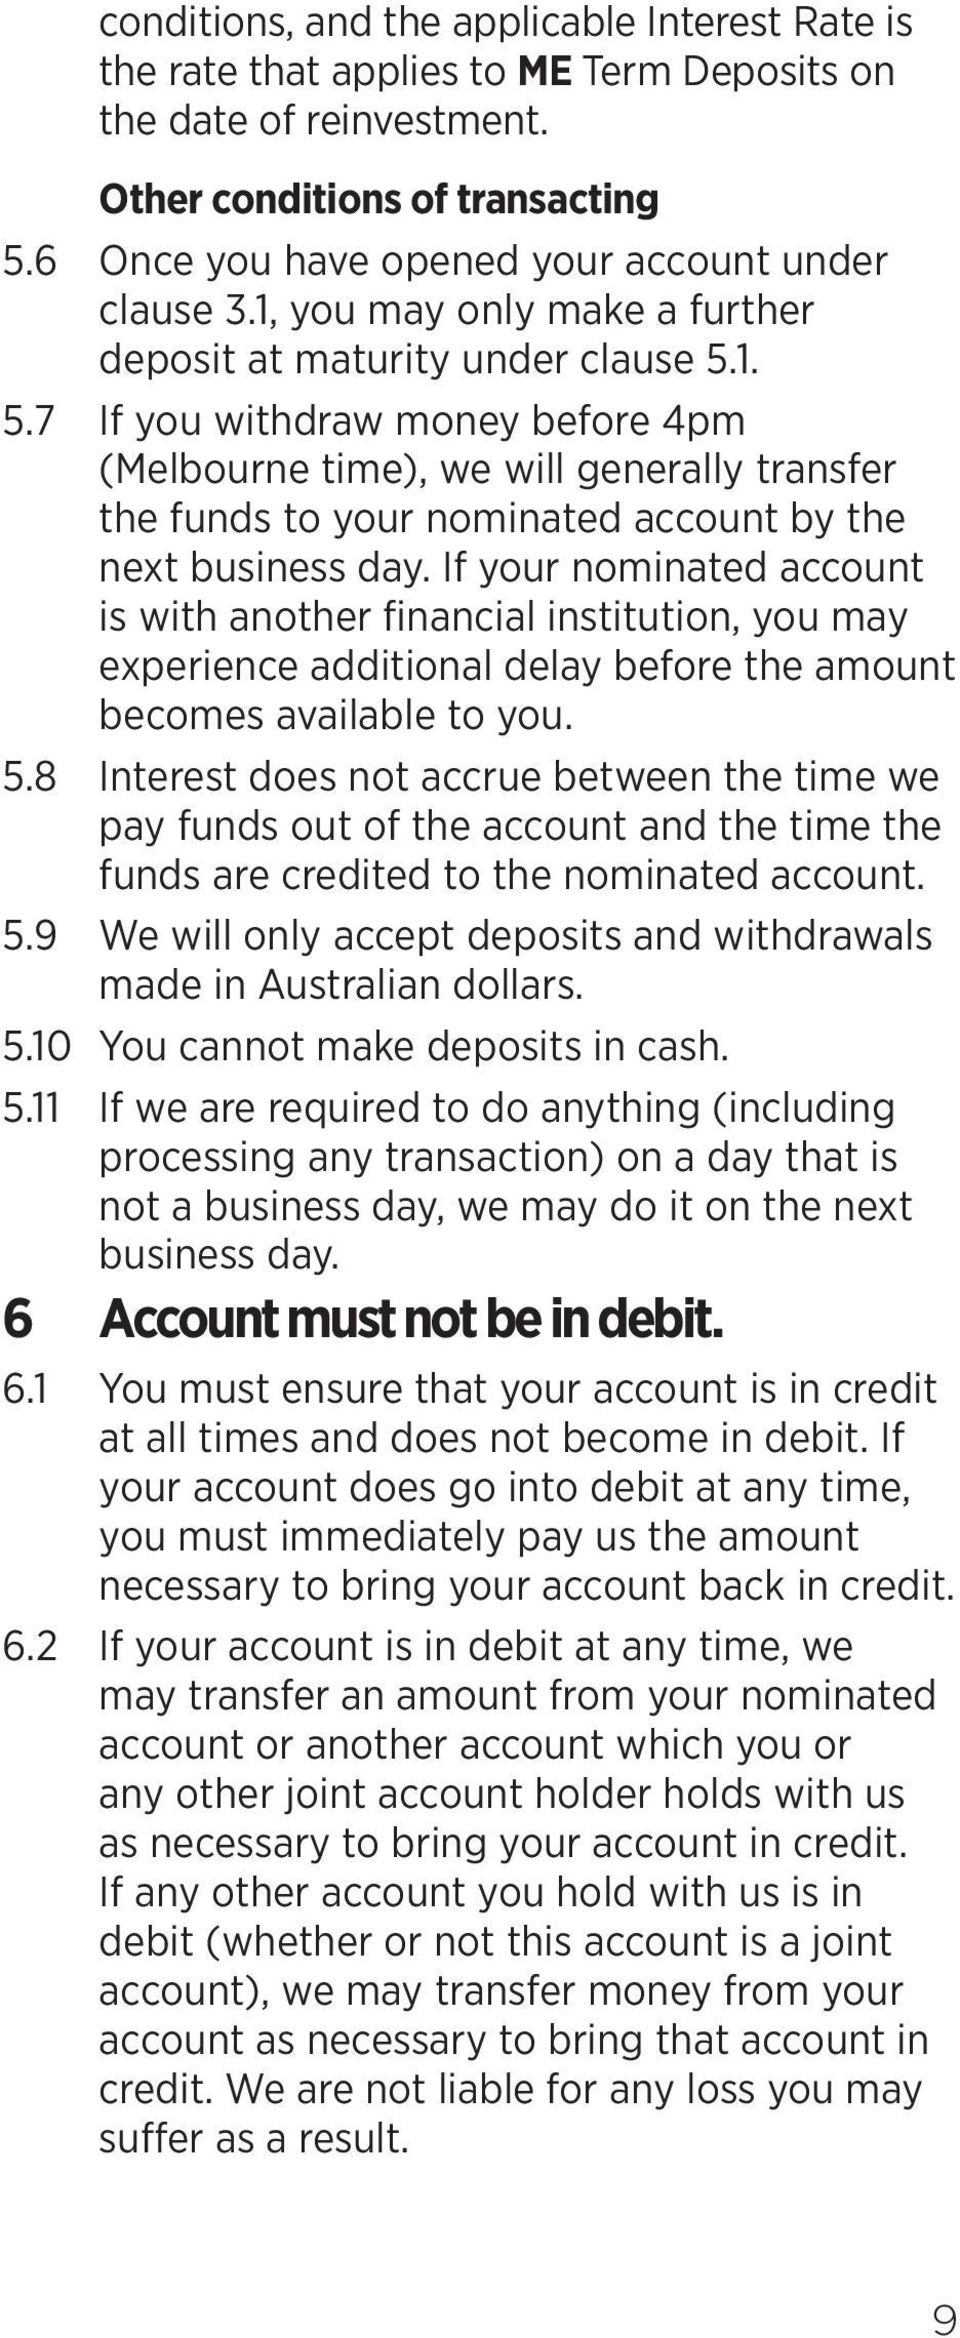 1. 5.7 If you withdraw money before 4pm (Melbourne time), we will generally transfer the funds to your nominated account by the next business day.